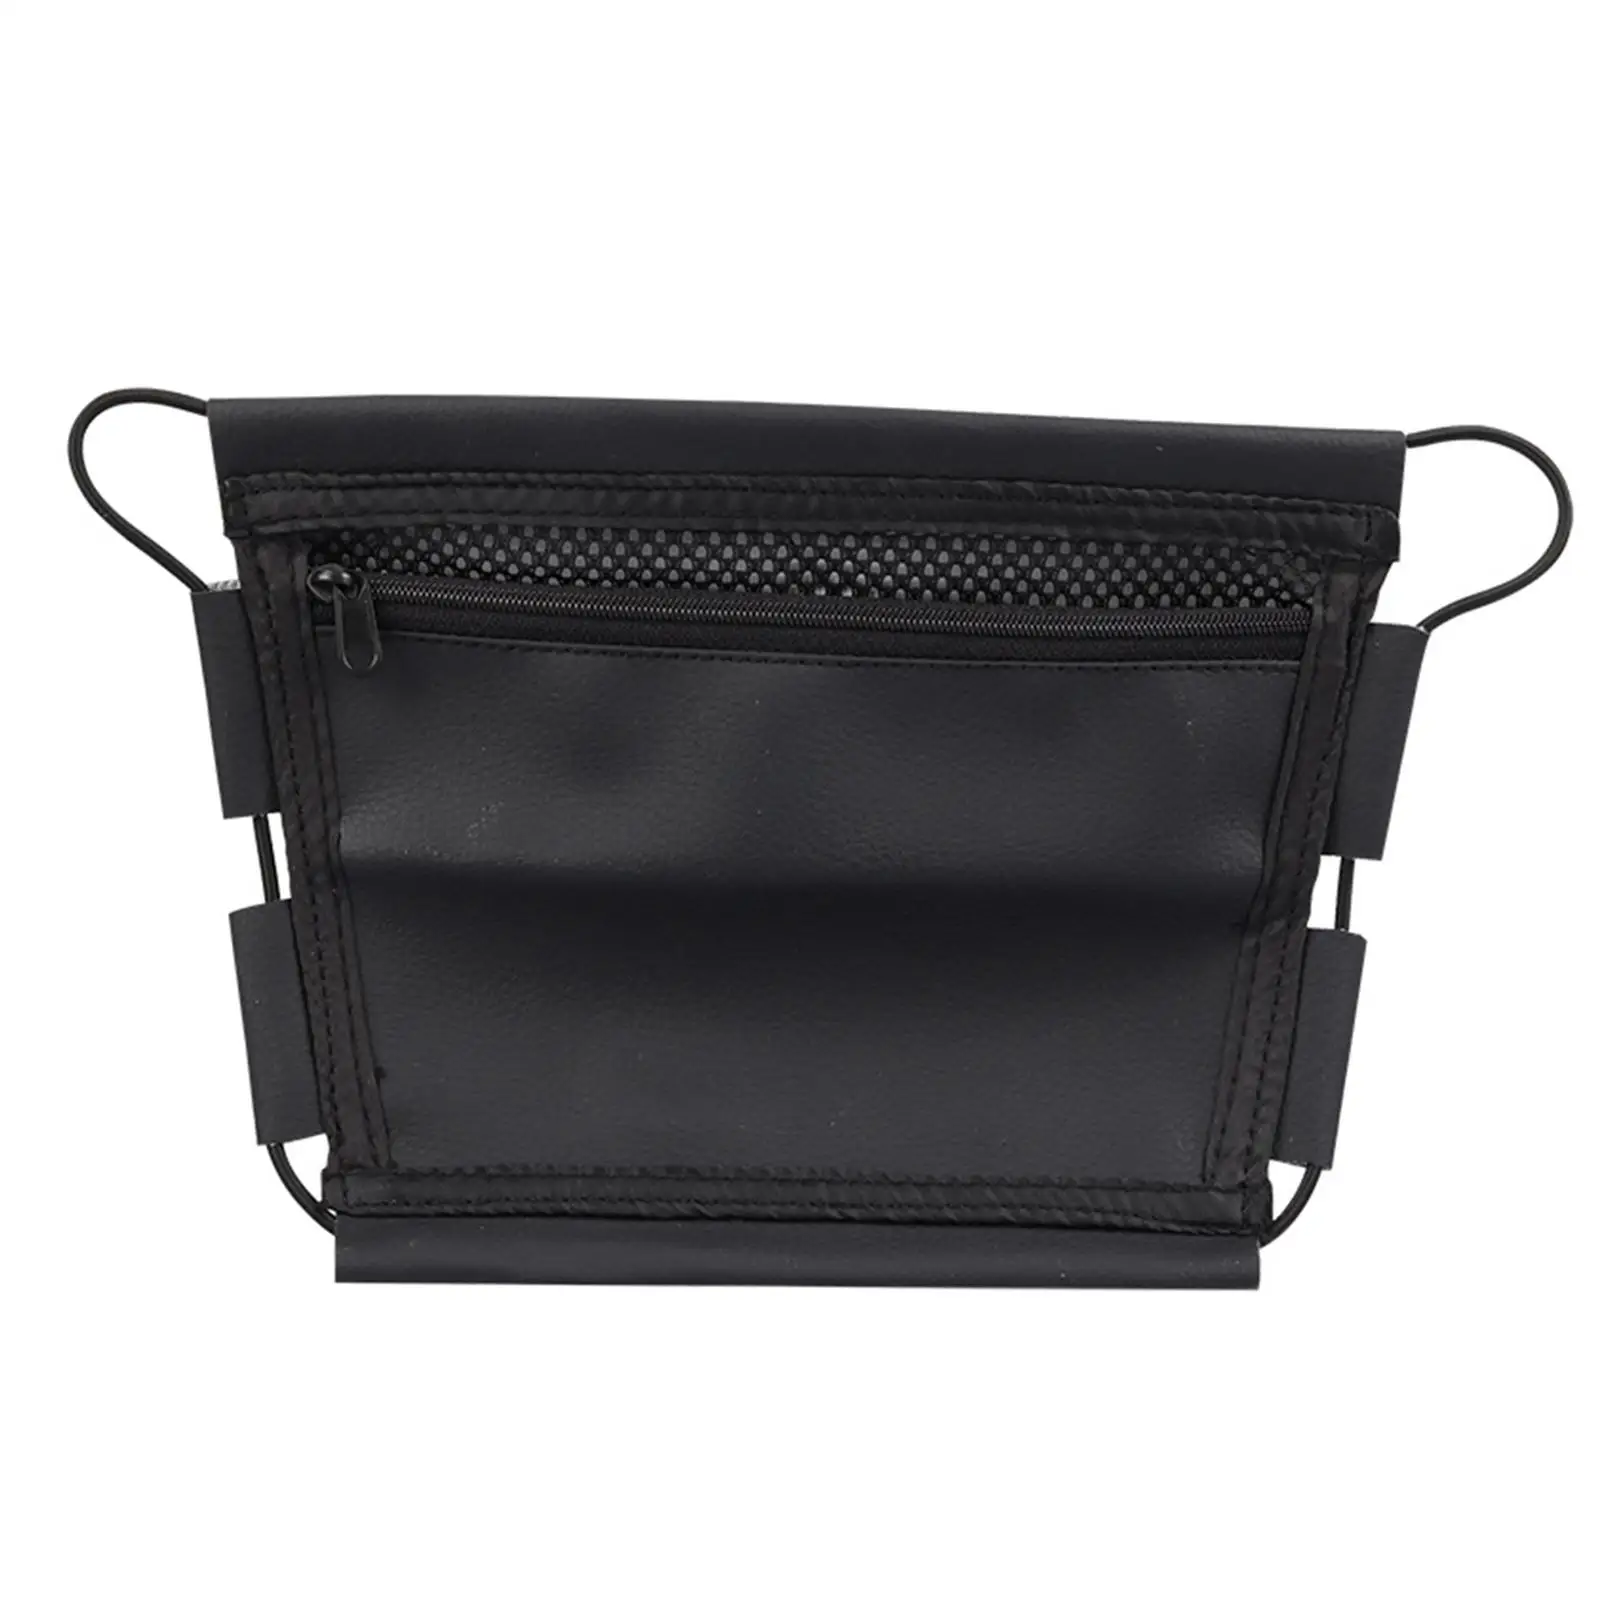 PU Leather Under Seat Storage Bag Black Durable Tool for Motorcycle